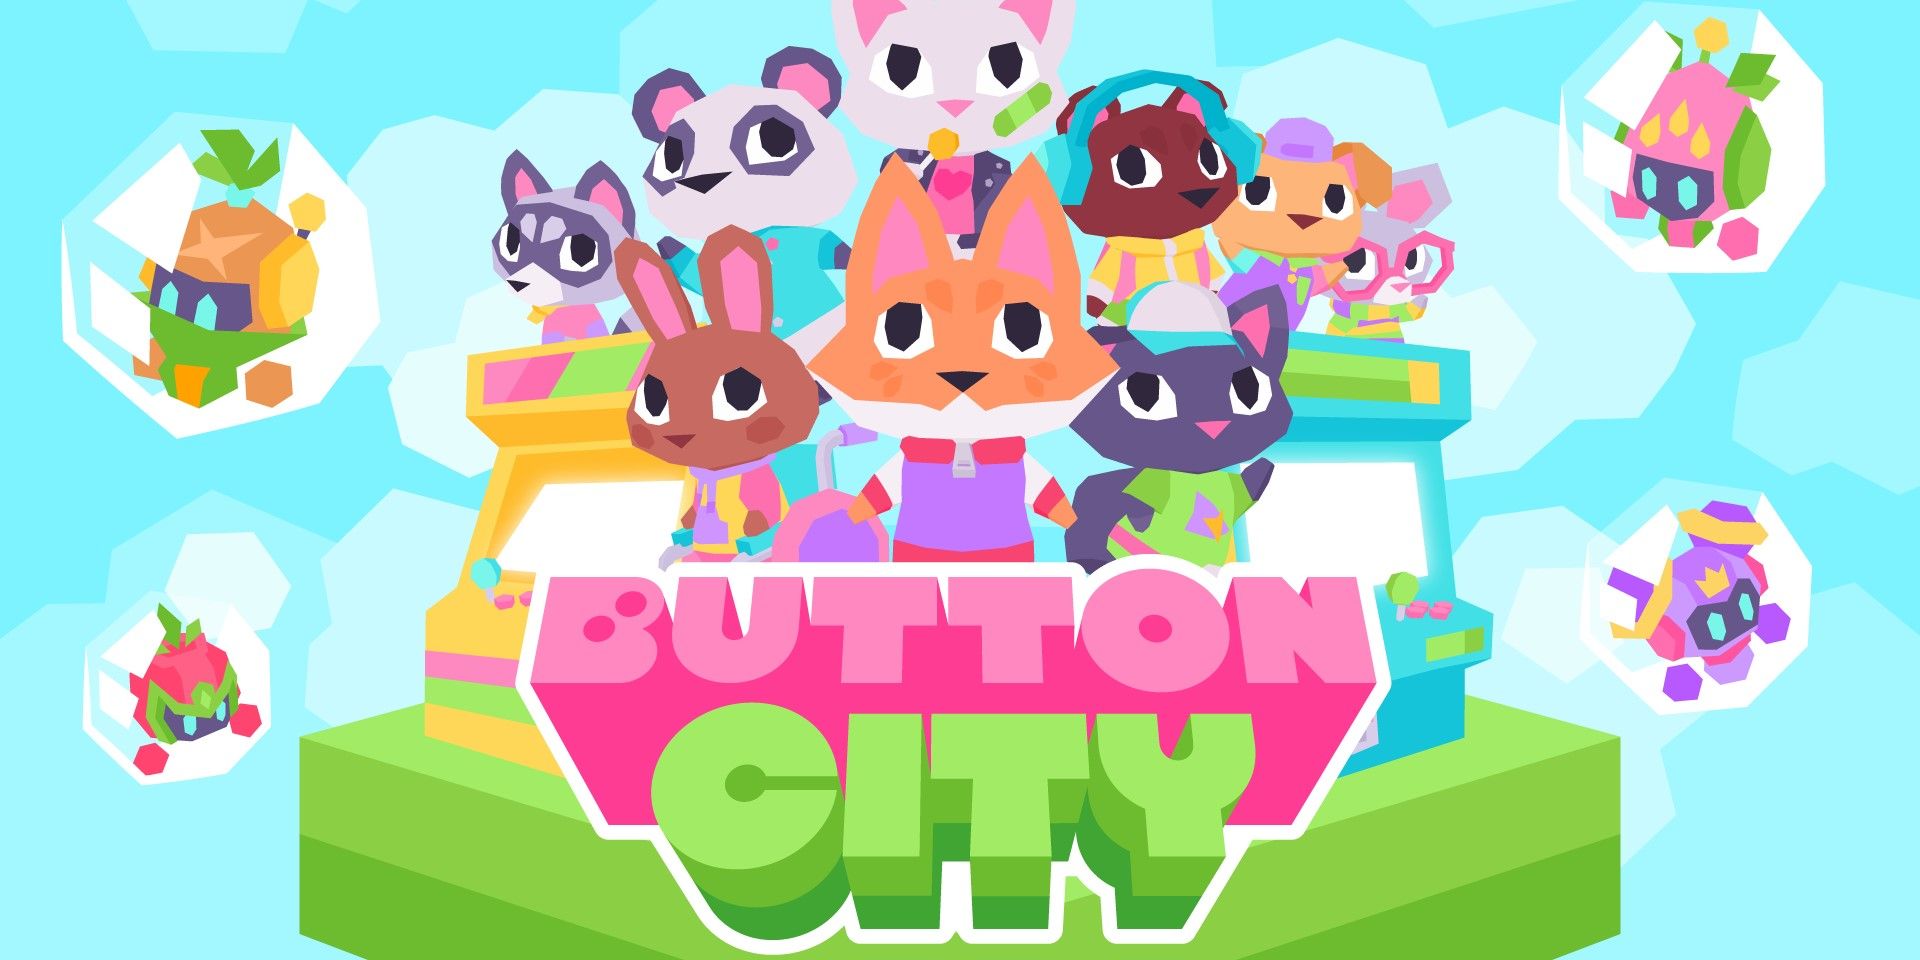 The title art for Button City.